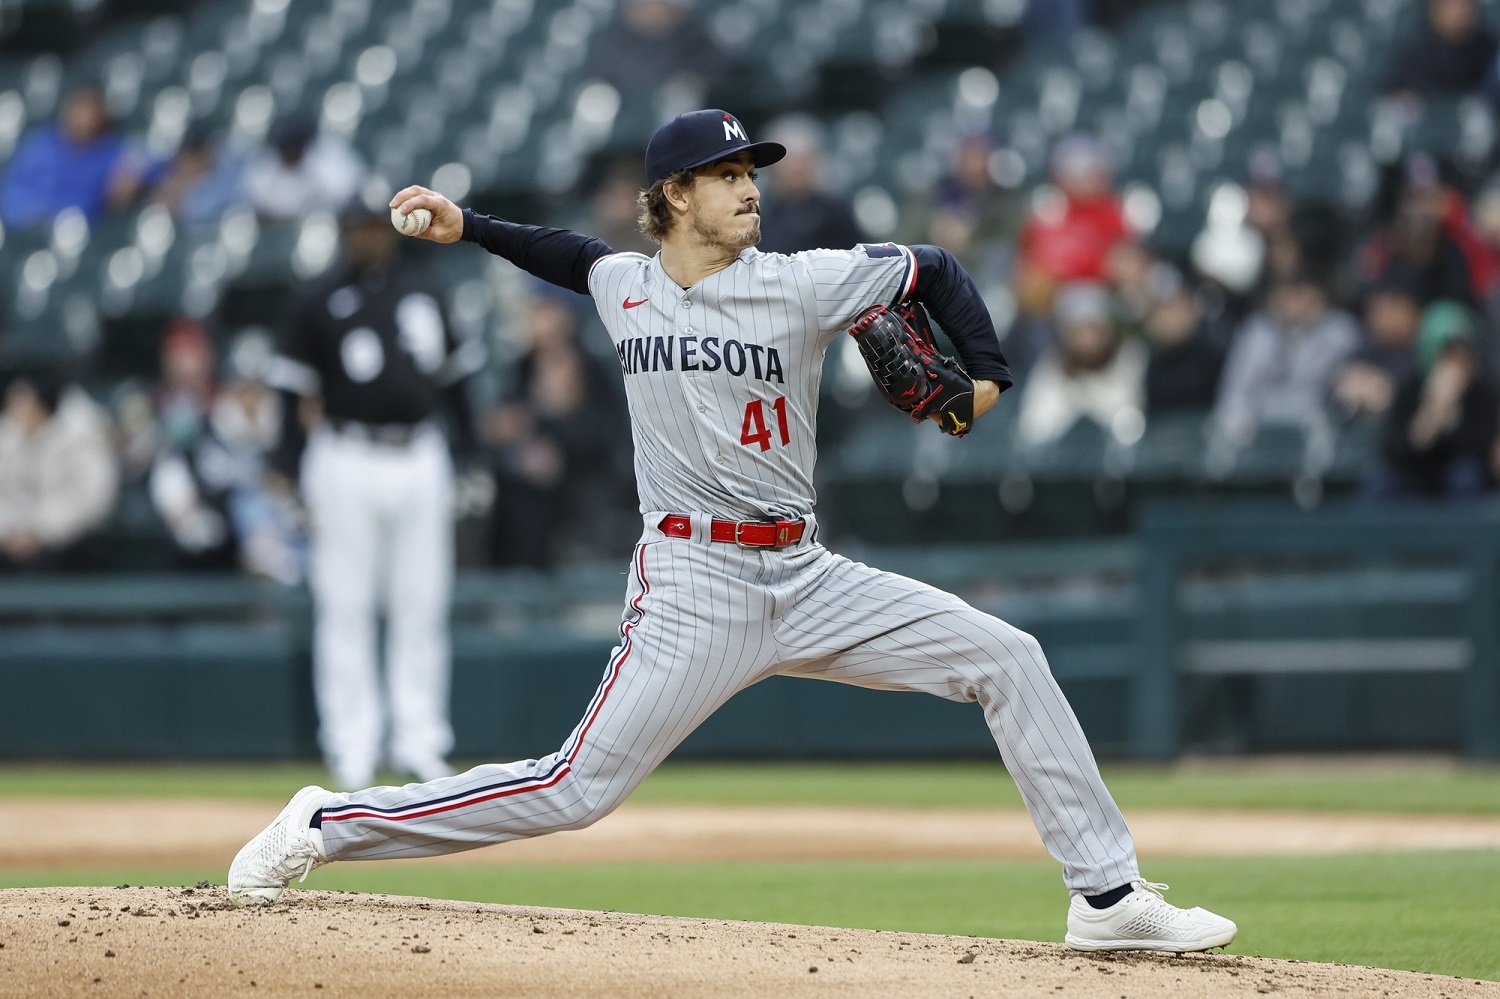 White Sox pitchers 'working through' walk problems - Chicago Sun-Times